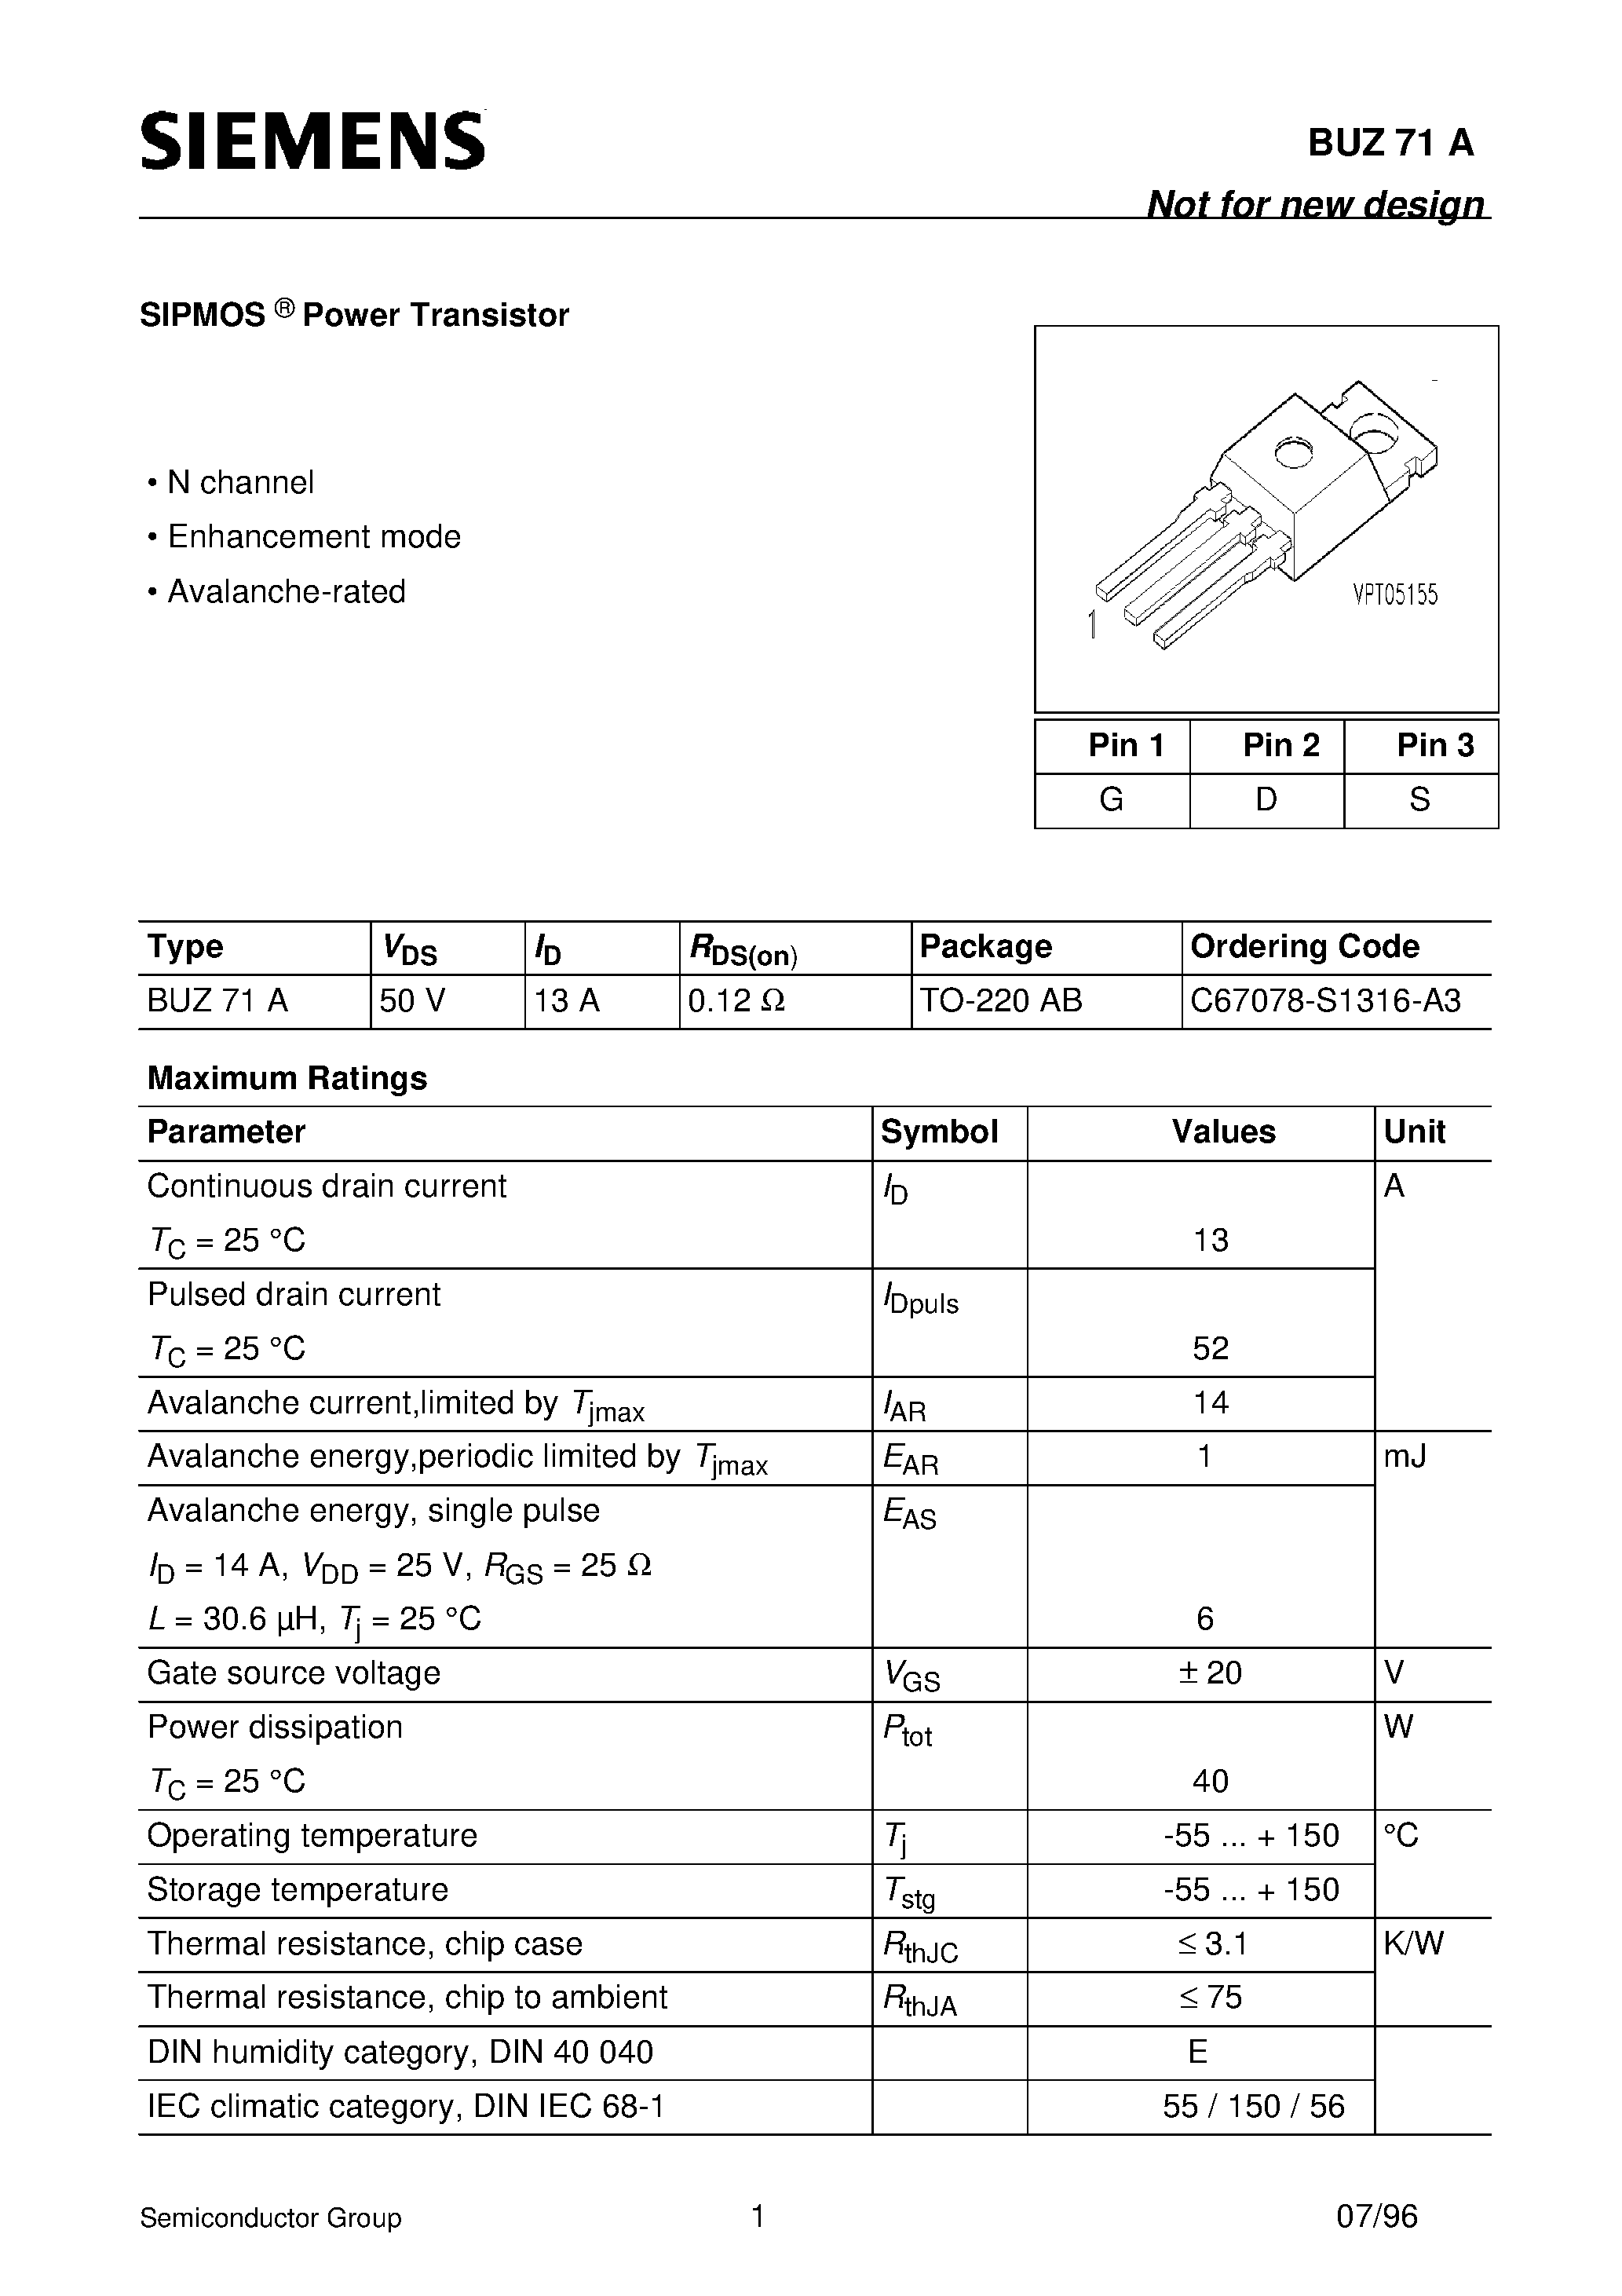 Datasheet BUZ71A - SIPMOS Power Transistor (N channel Enhancement mode Avalanche-rated) page 1